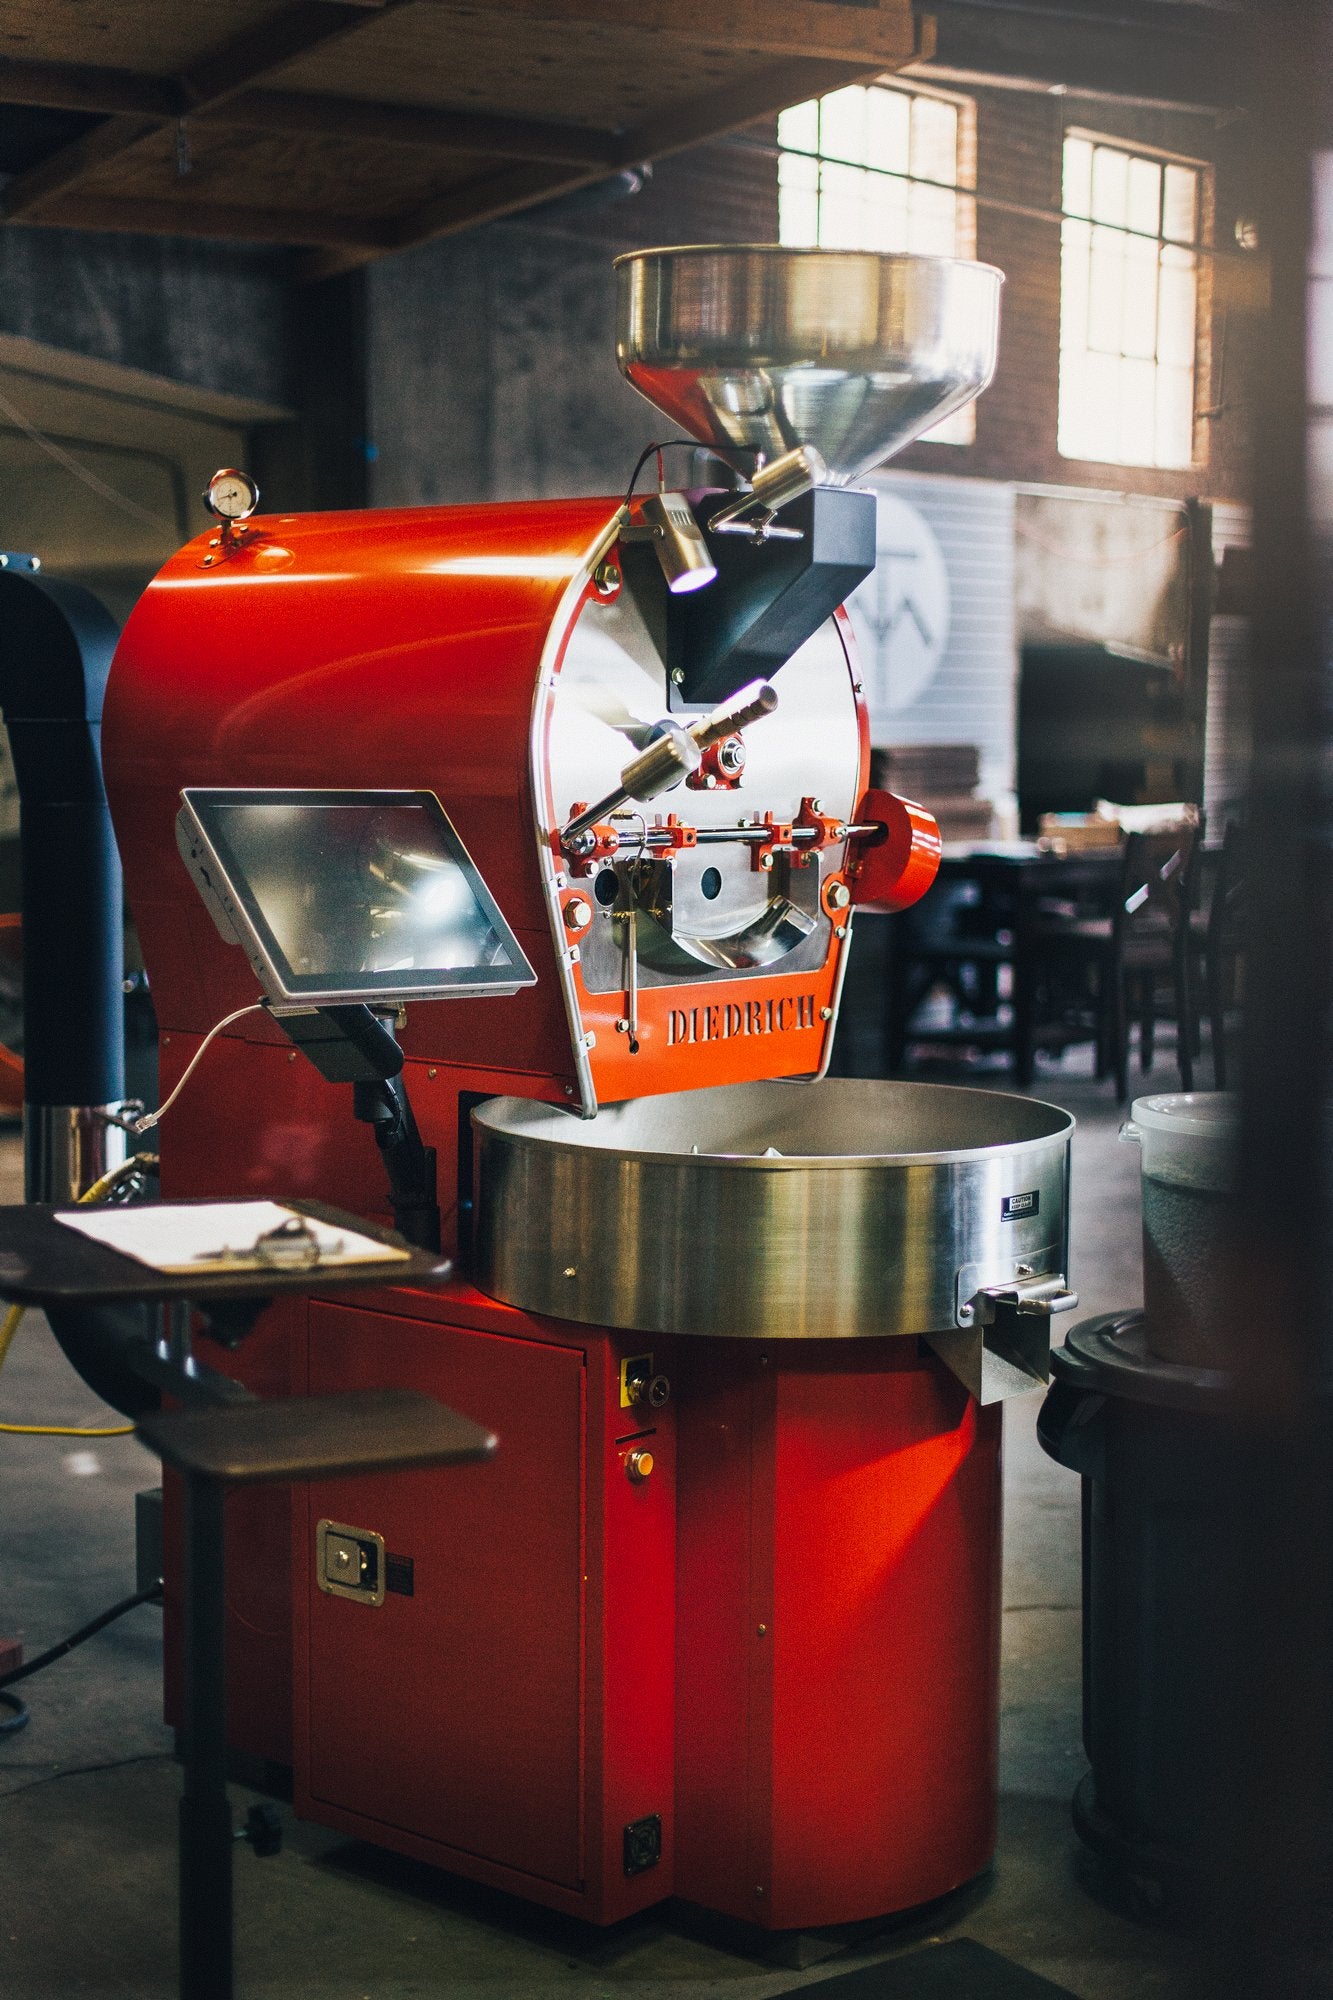 A Diedrich 12 Kilo coffee roaster previously used for Thou Mayest coffee at sunrise in the old warehouse